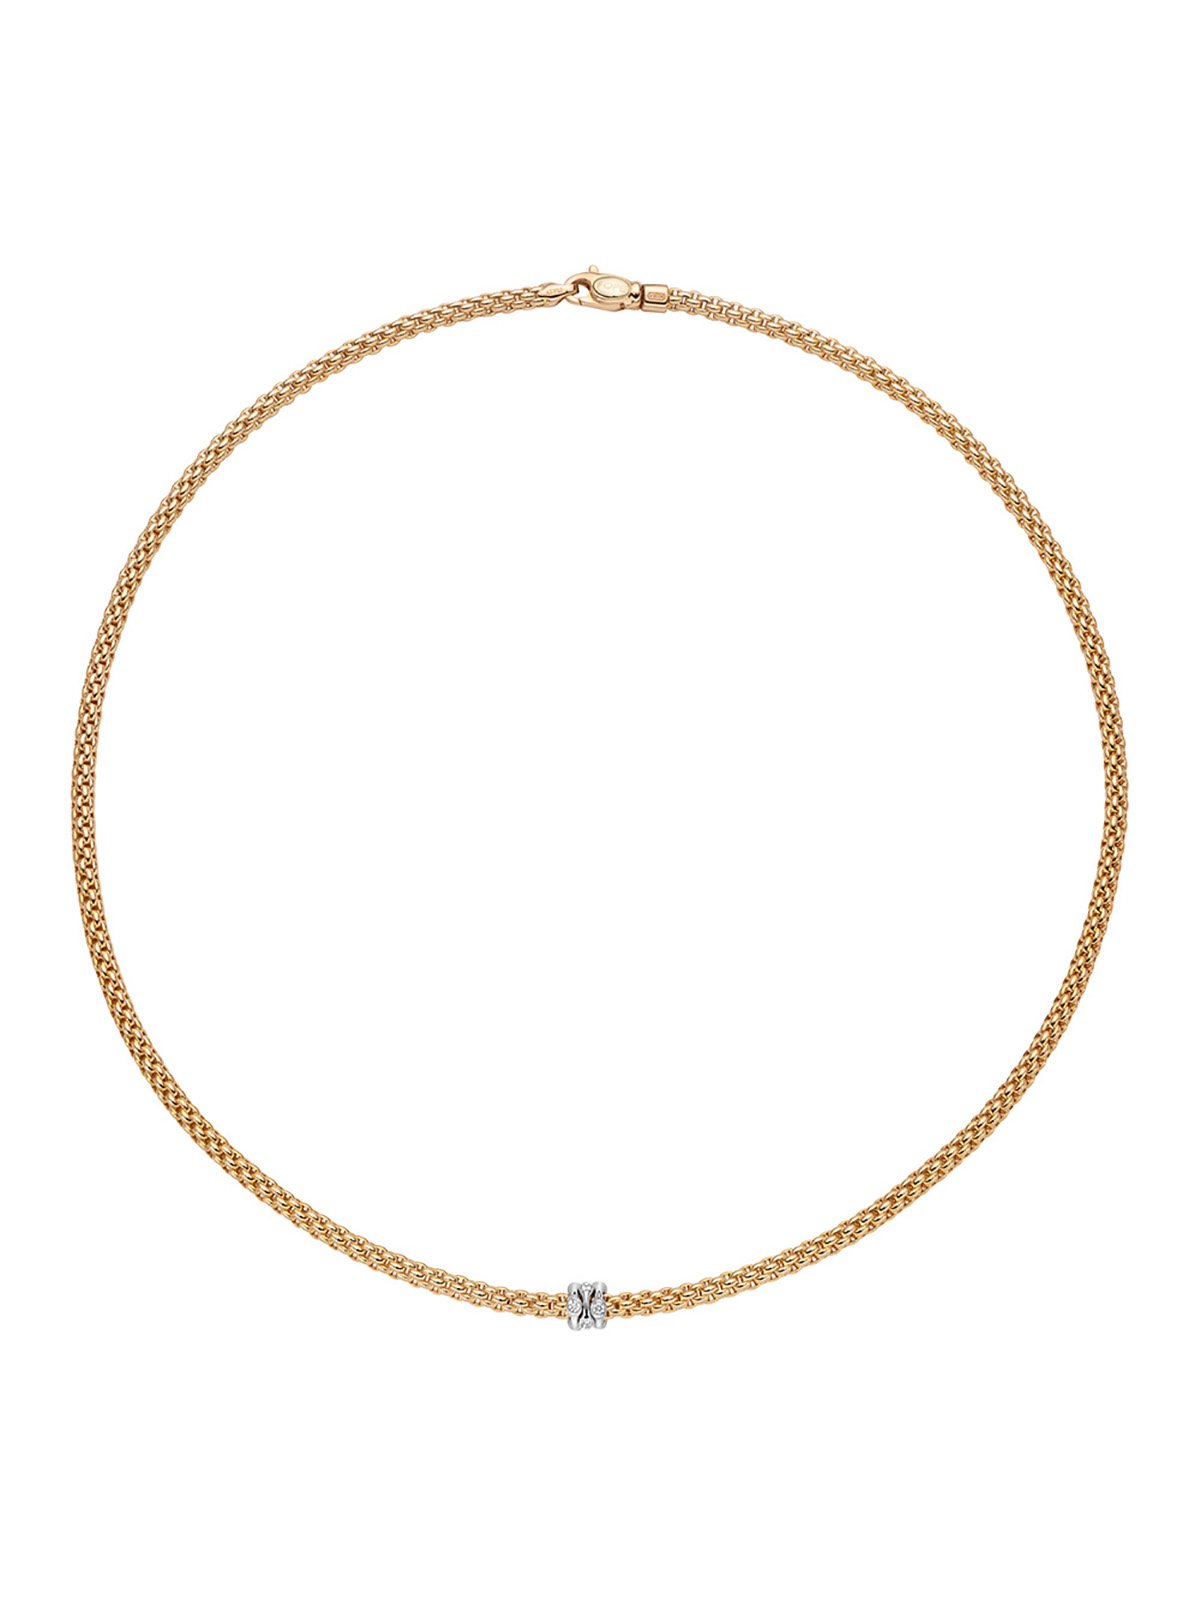 Fope Prima Necklace in 18ct Yellow Gold with Diamonds